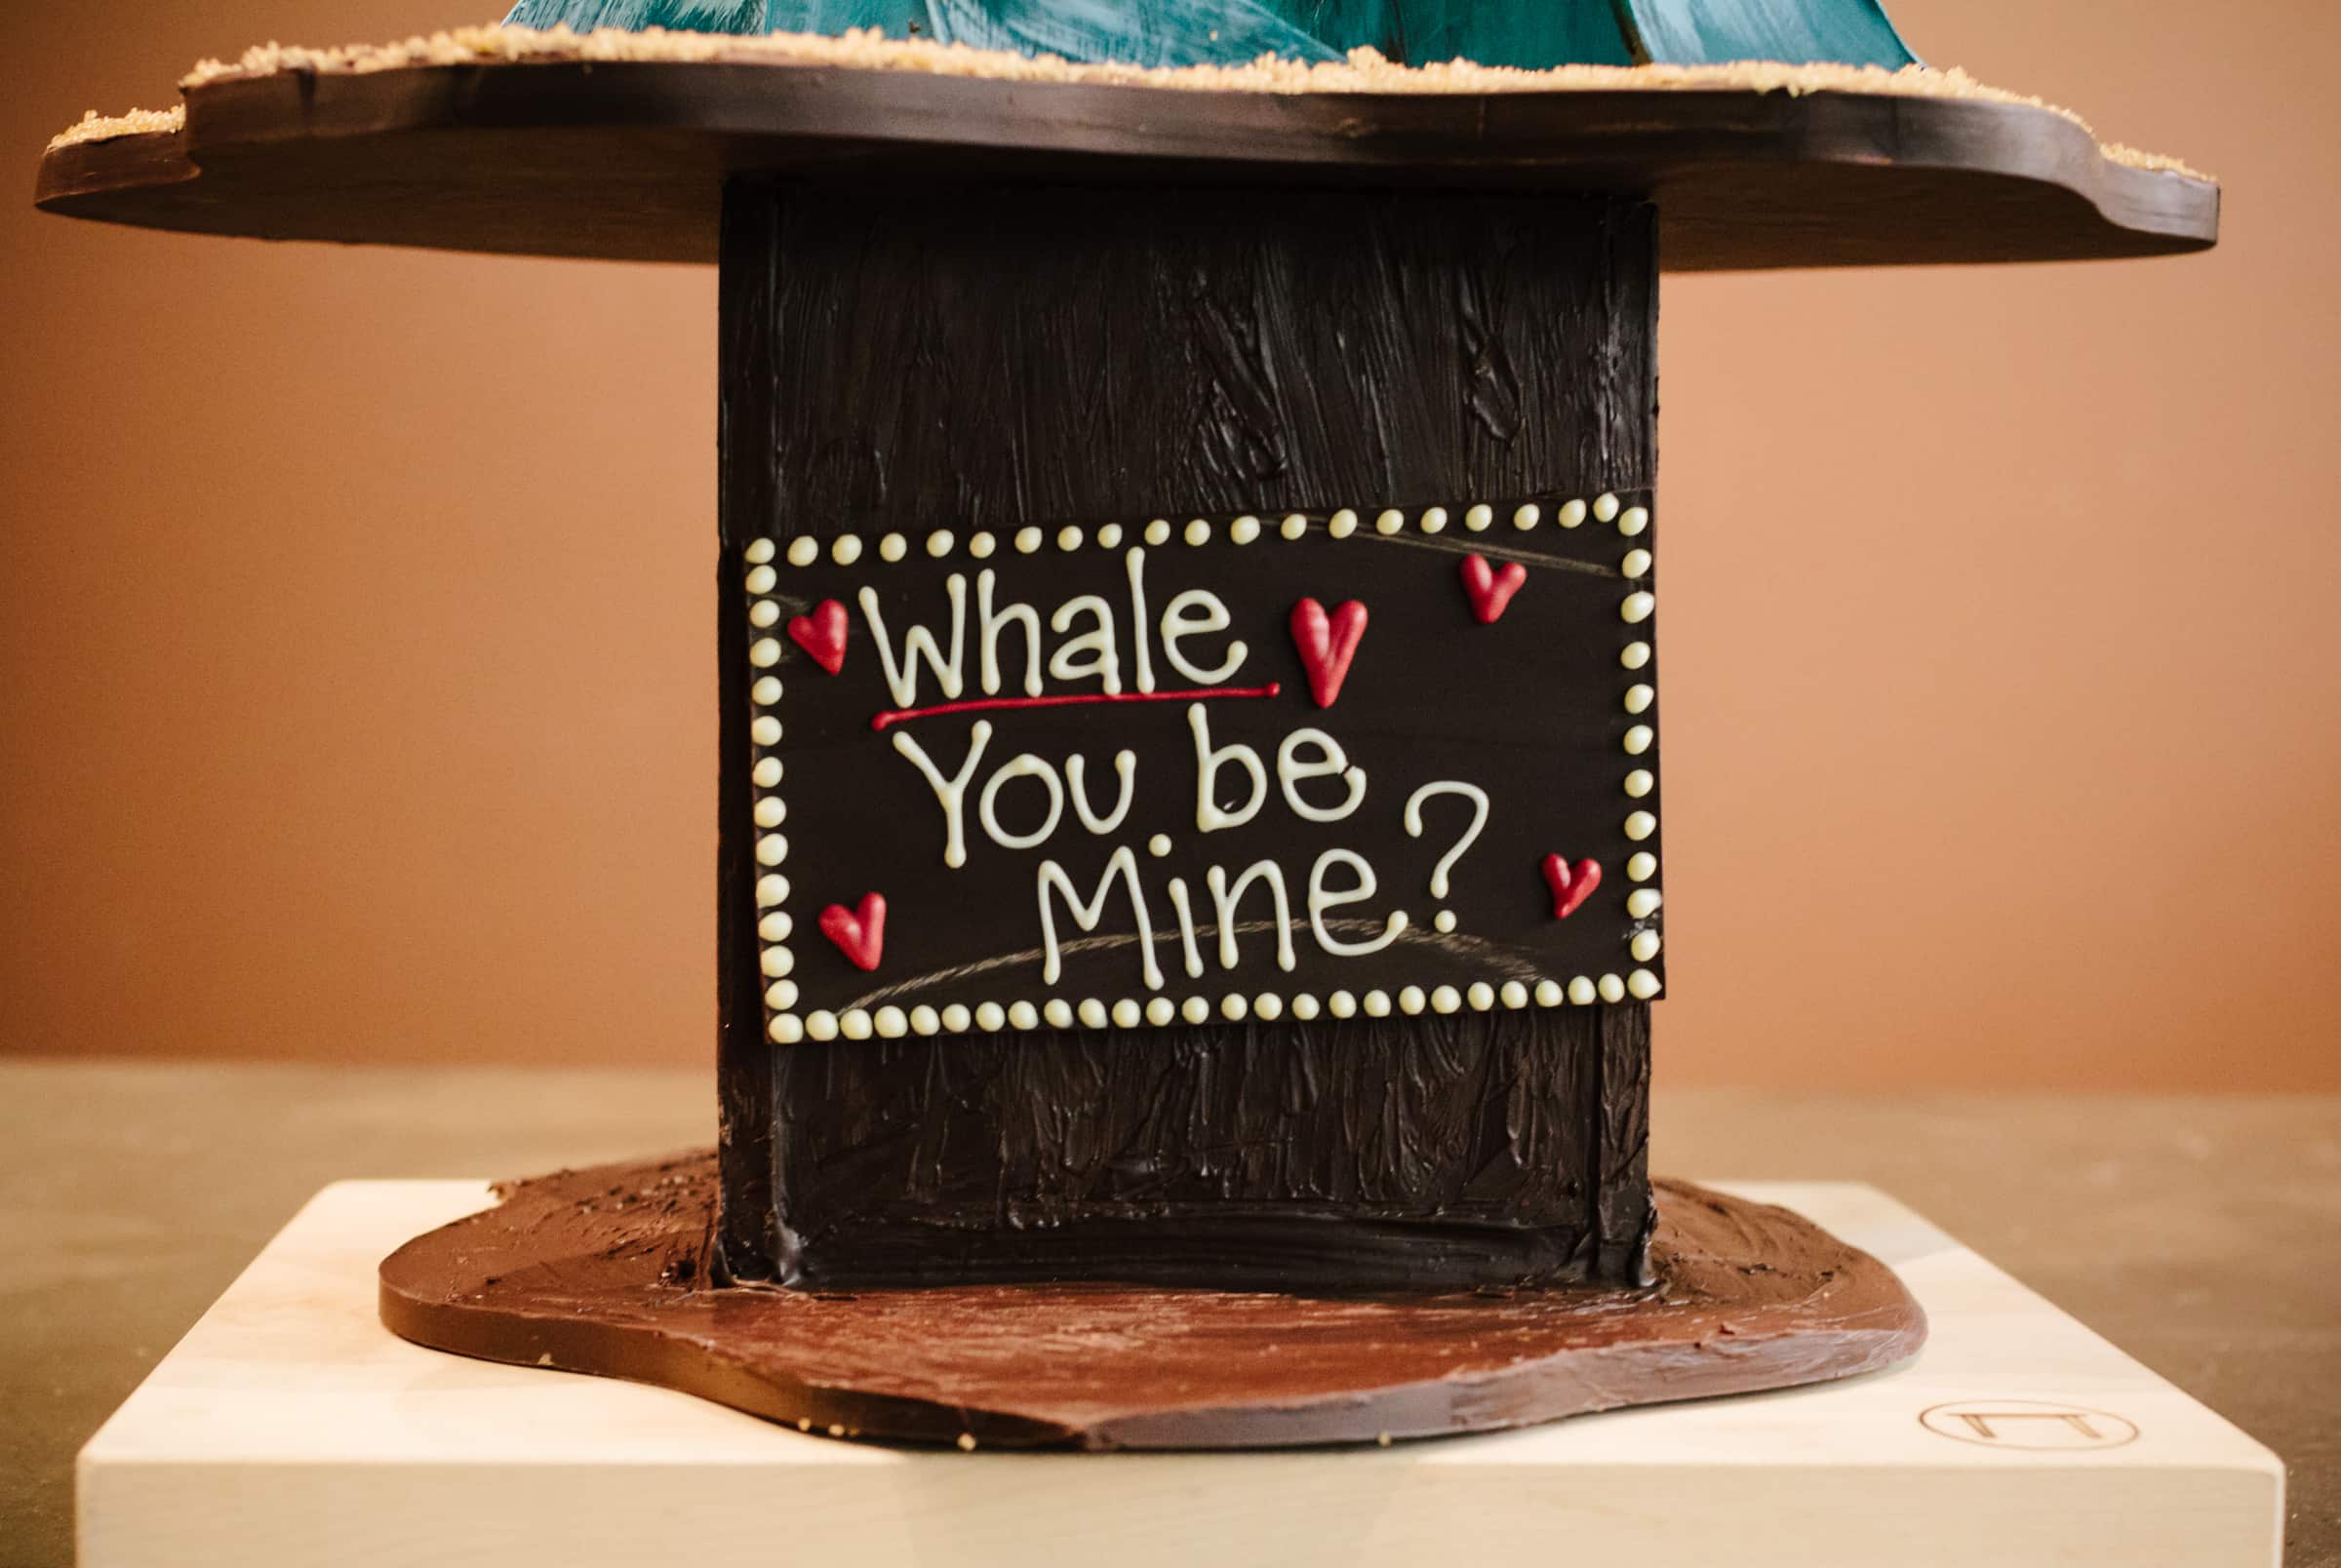 Whale You Be Mine? graphics